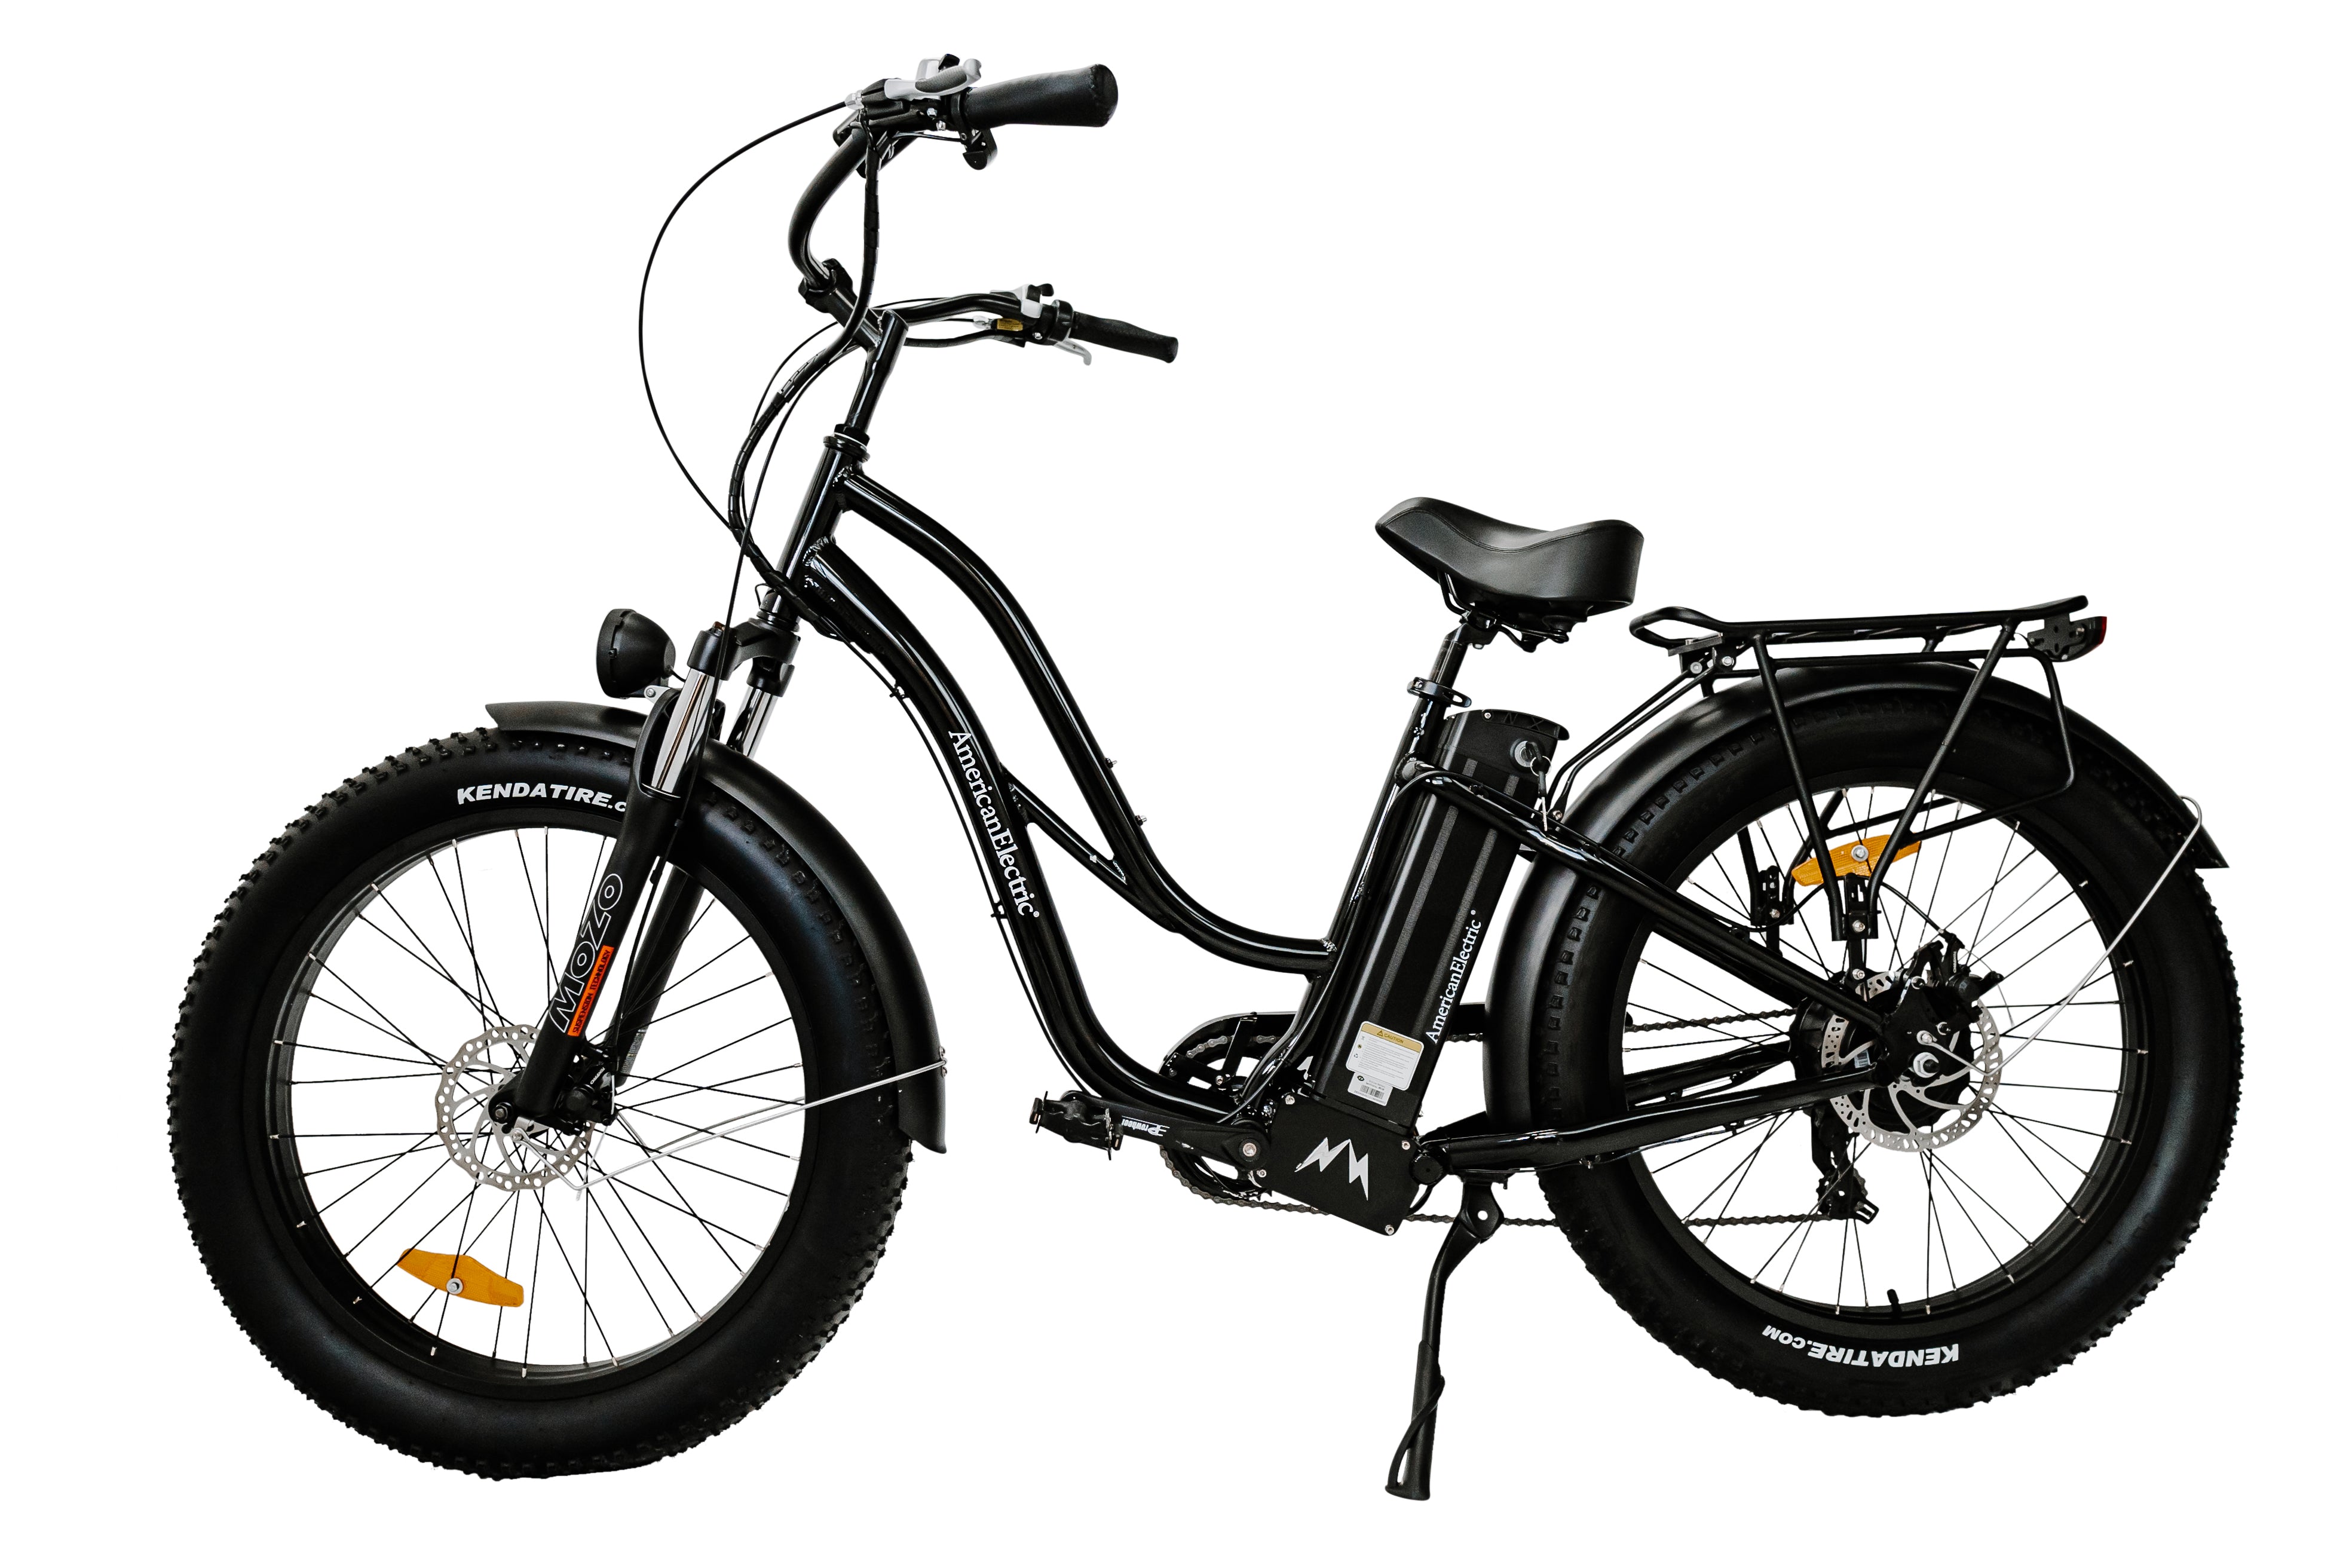 AmericanElectric Steller Step-Through 750w Electric Cruiser Bicycle